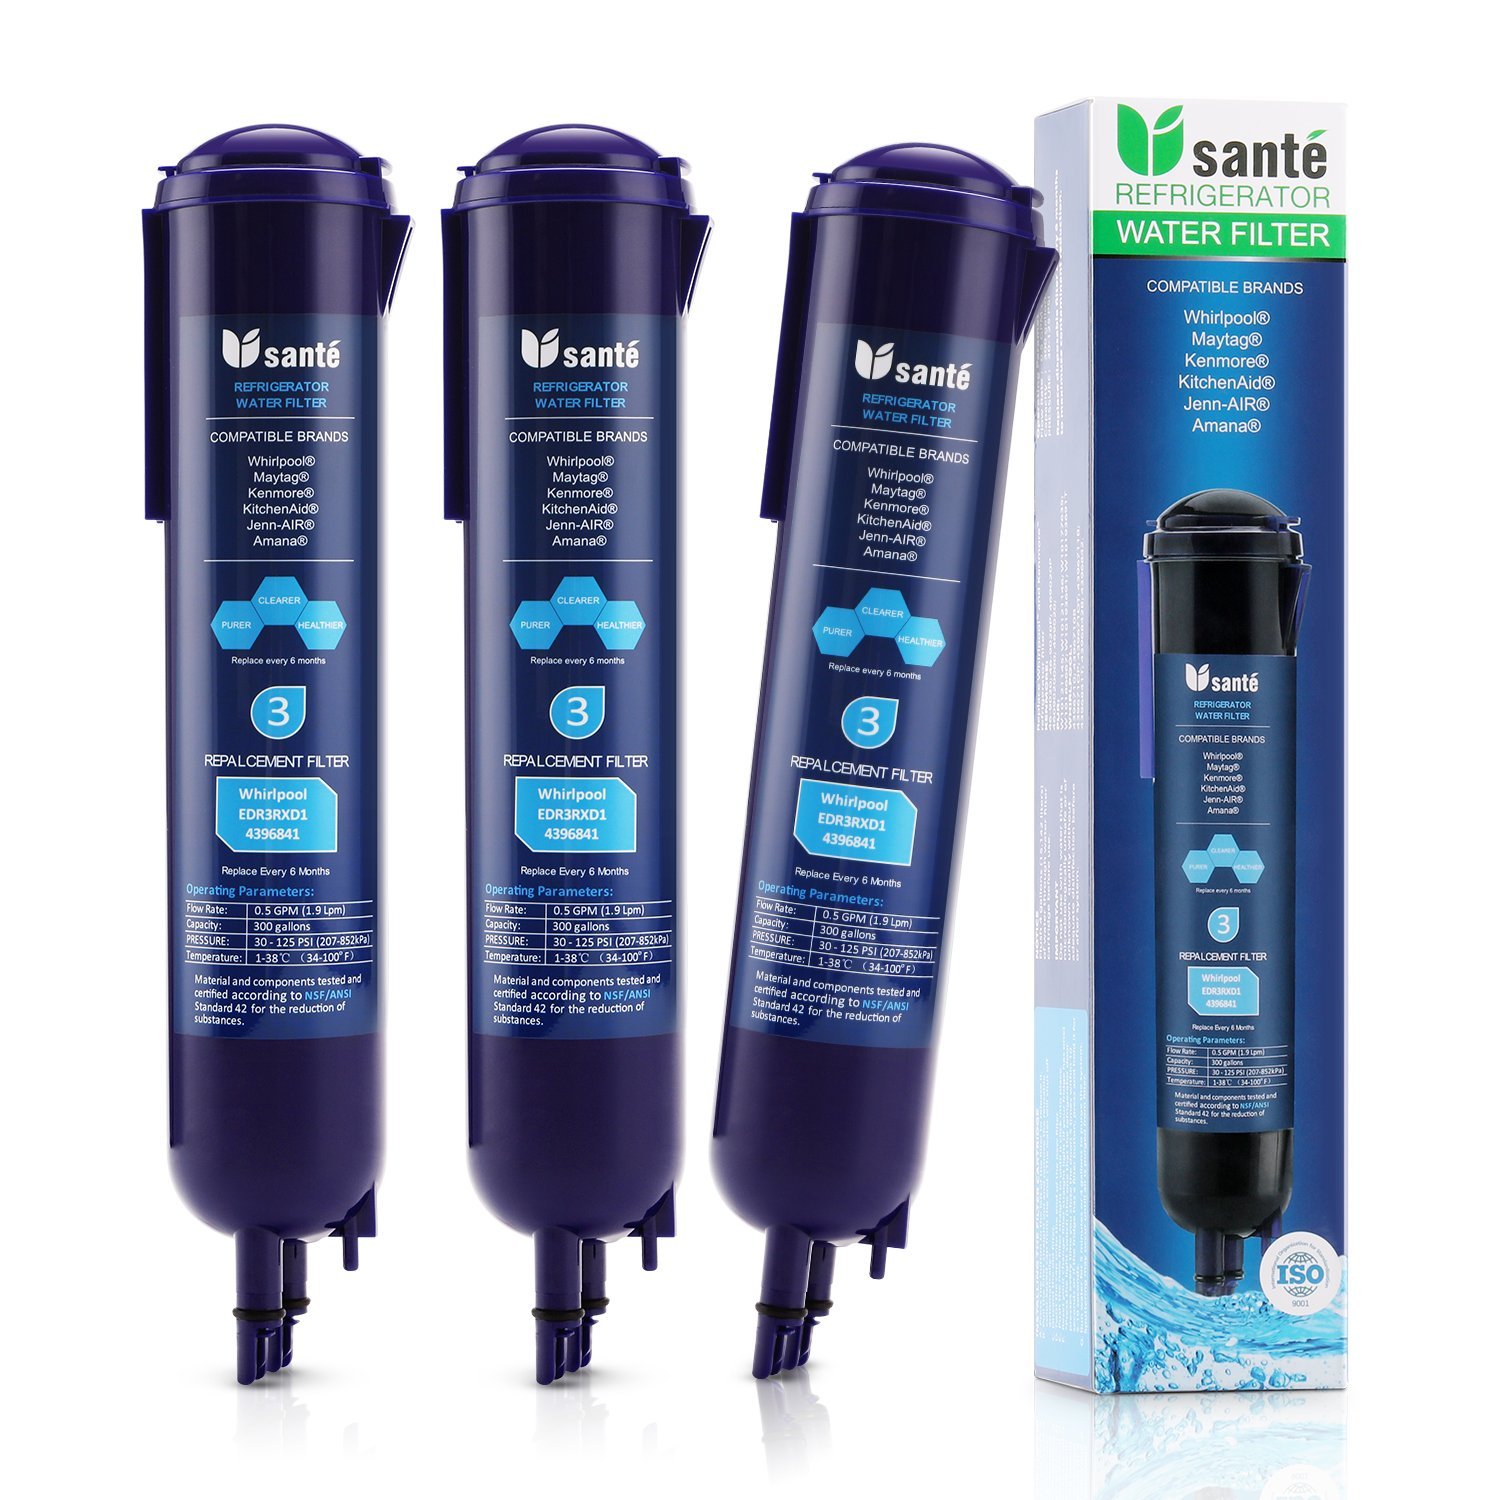 Upsante Refrigerator Water Filter Compatible for Whirlpool 4396841 4396710 46-9030 Filter 3 (3 pack,package may vary)